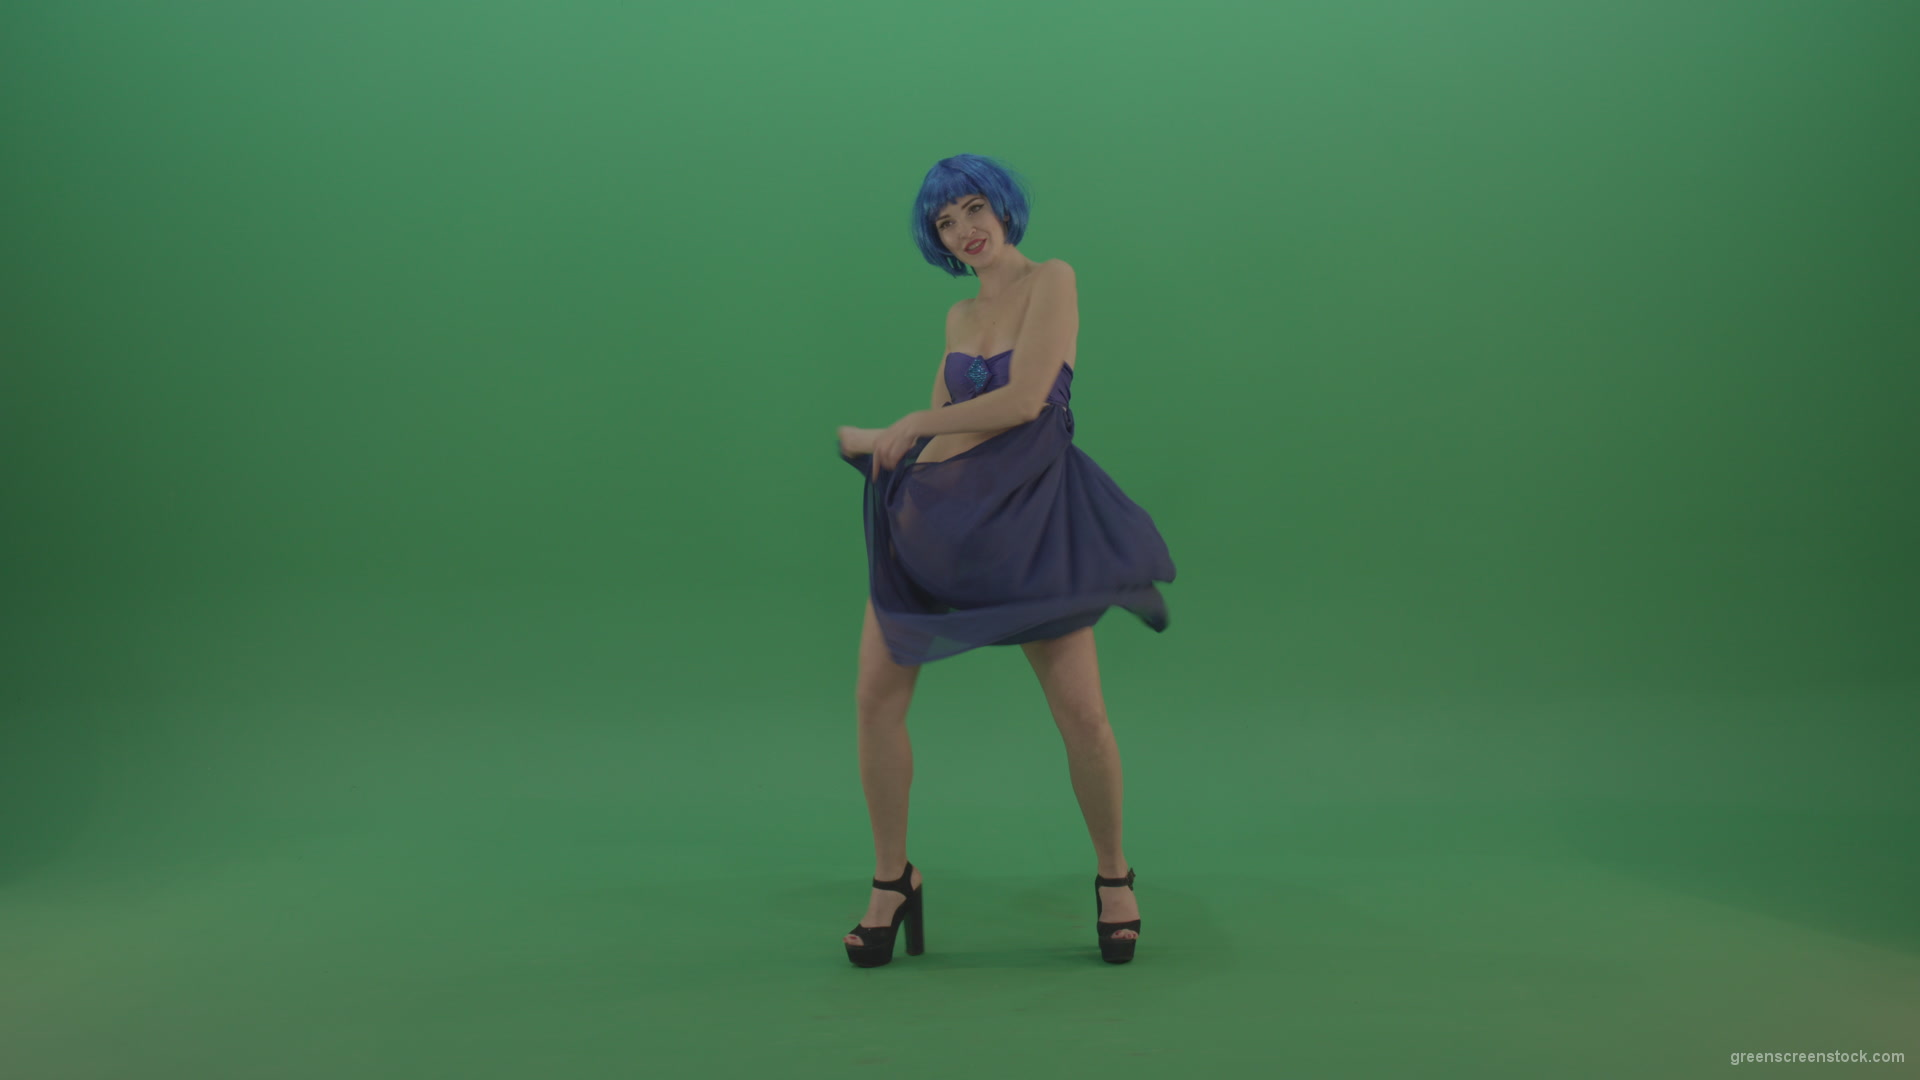 Full-size-erotic-young-girl-dancing-go-go-with-blue-dress-curtain-on-green-screen-1_001 Green Screen Stock